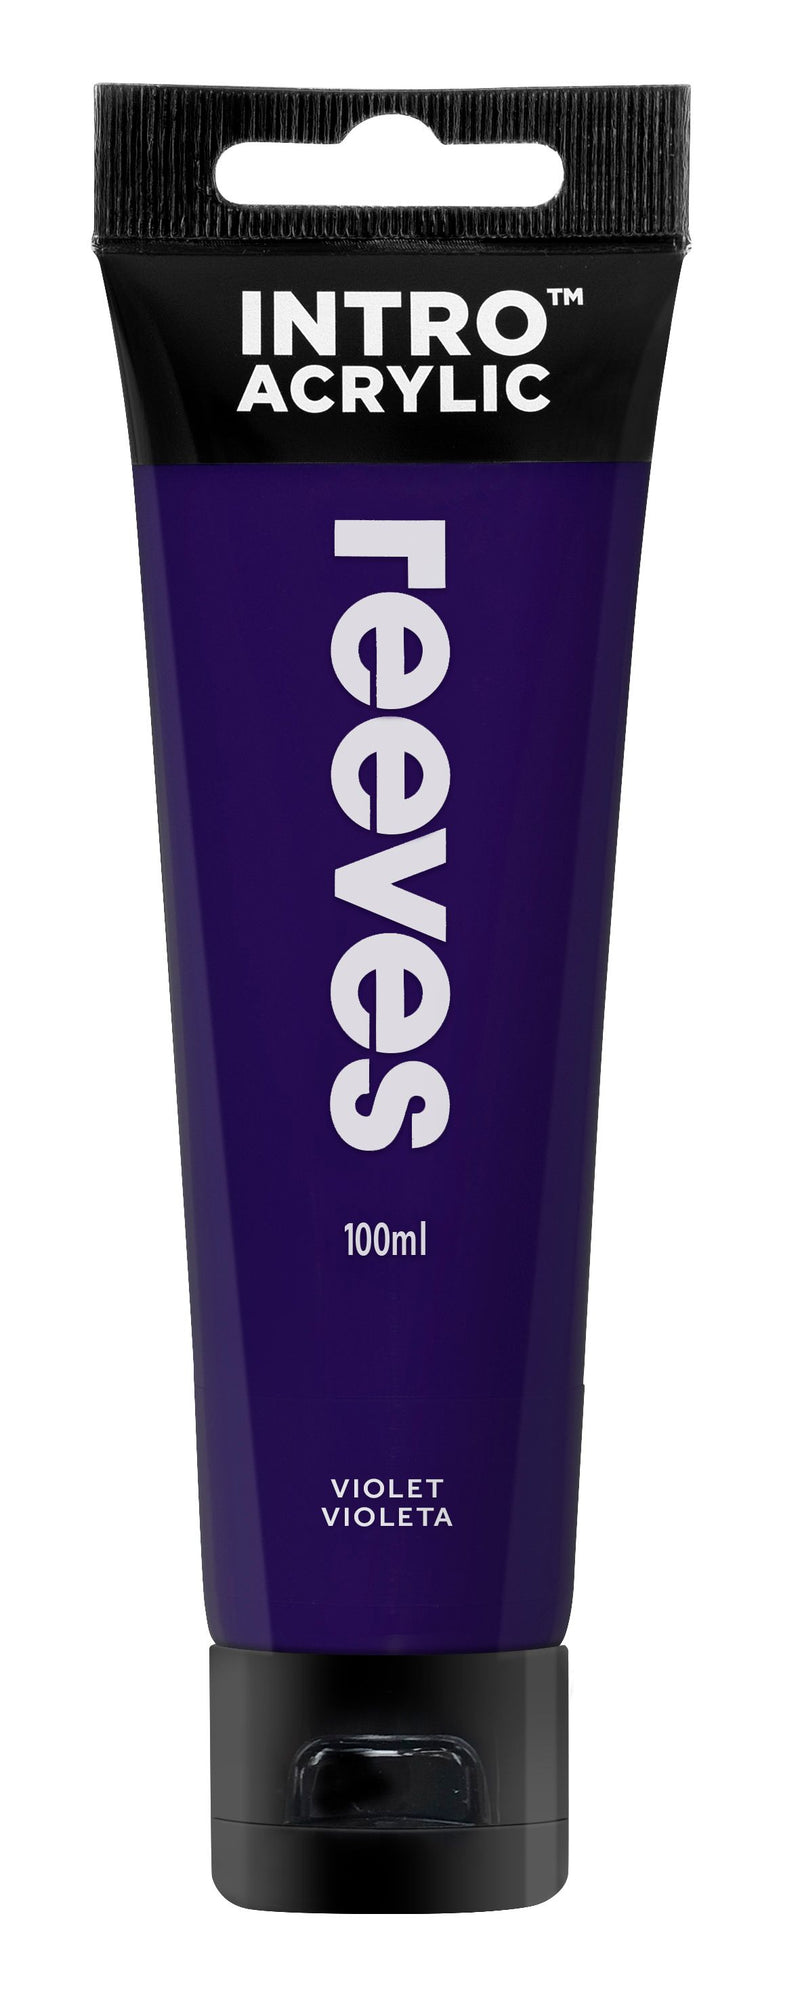 Reeves Intro Acrylic Paint 100ml